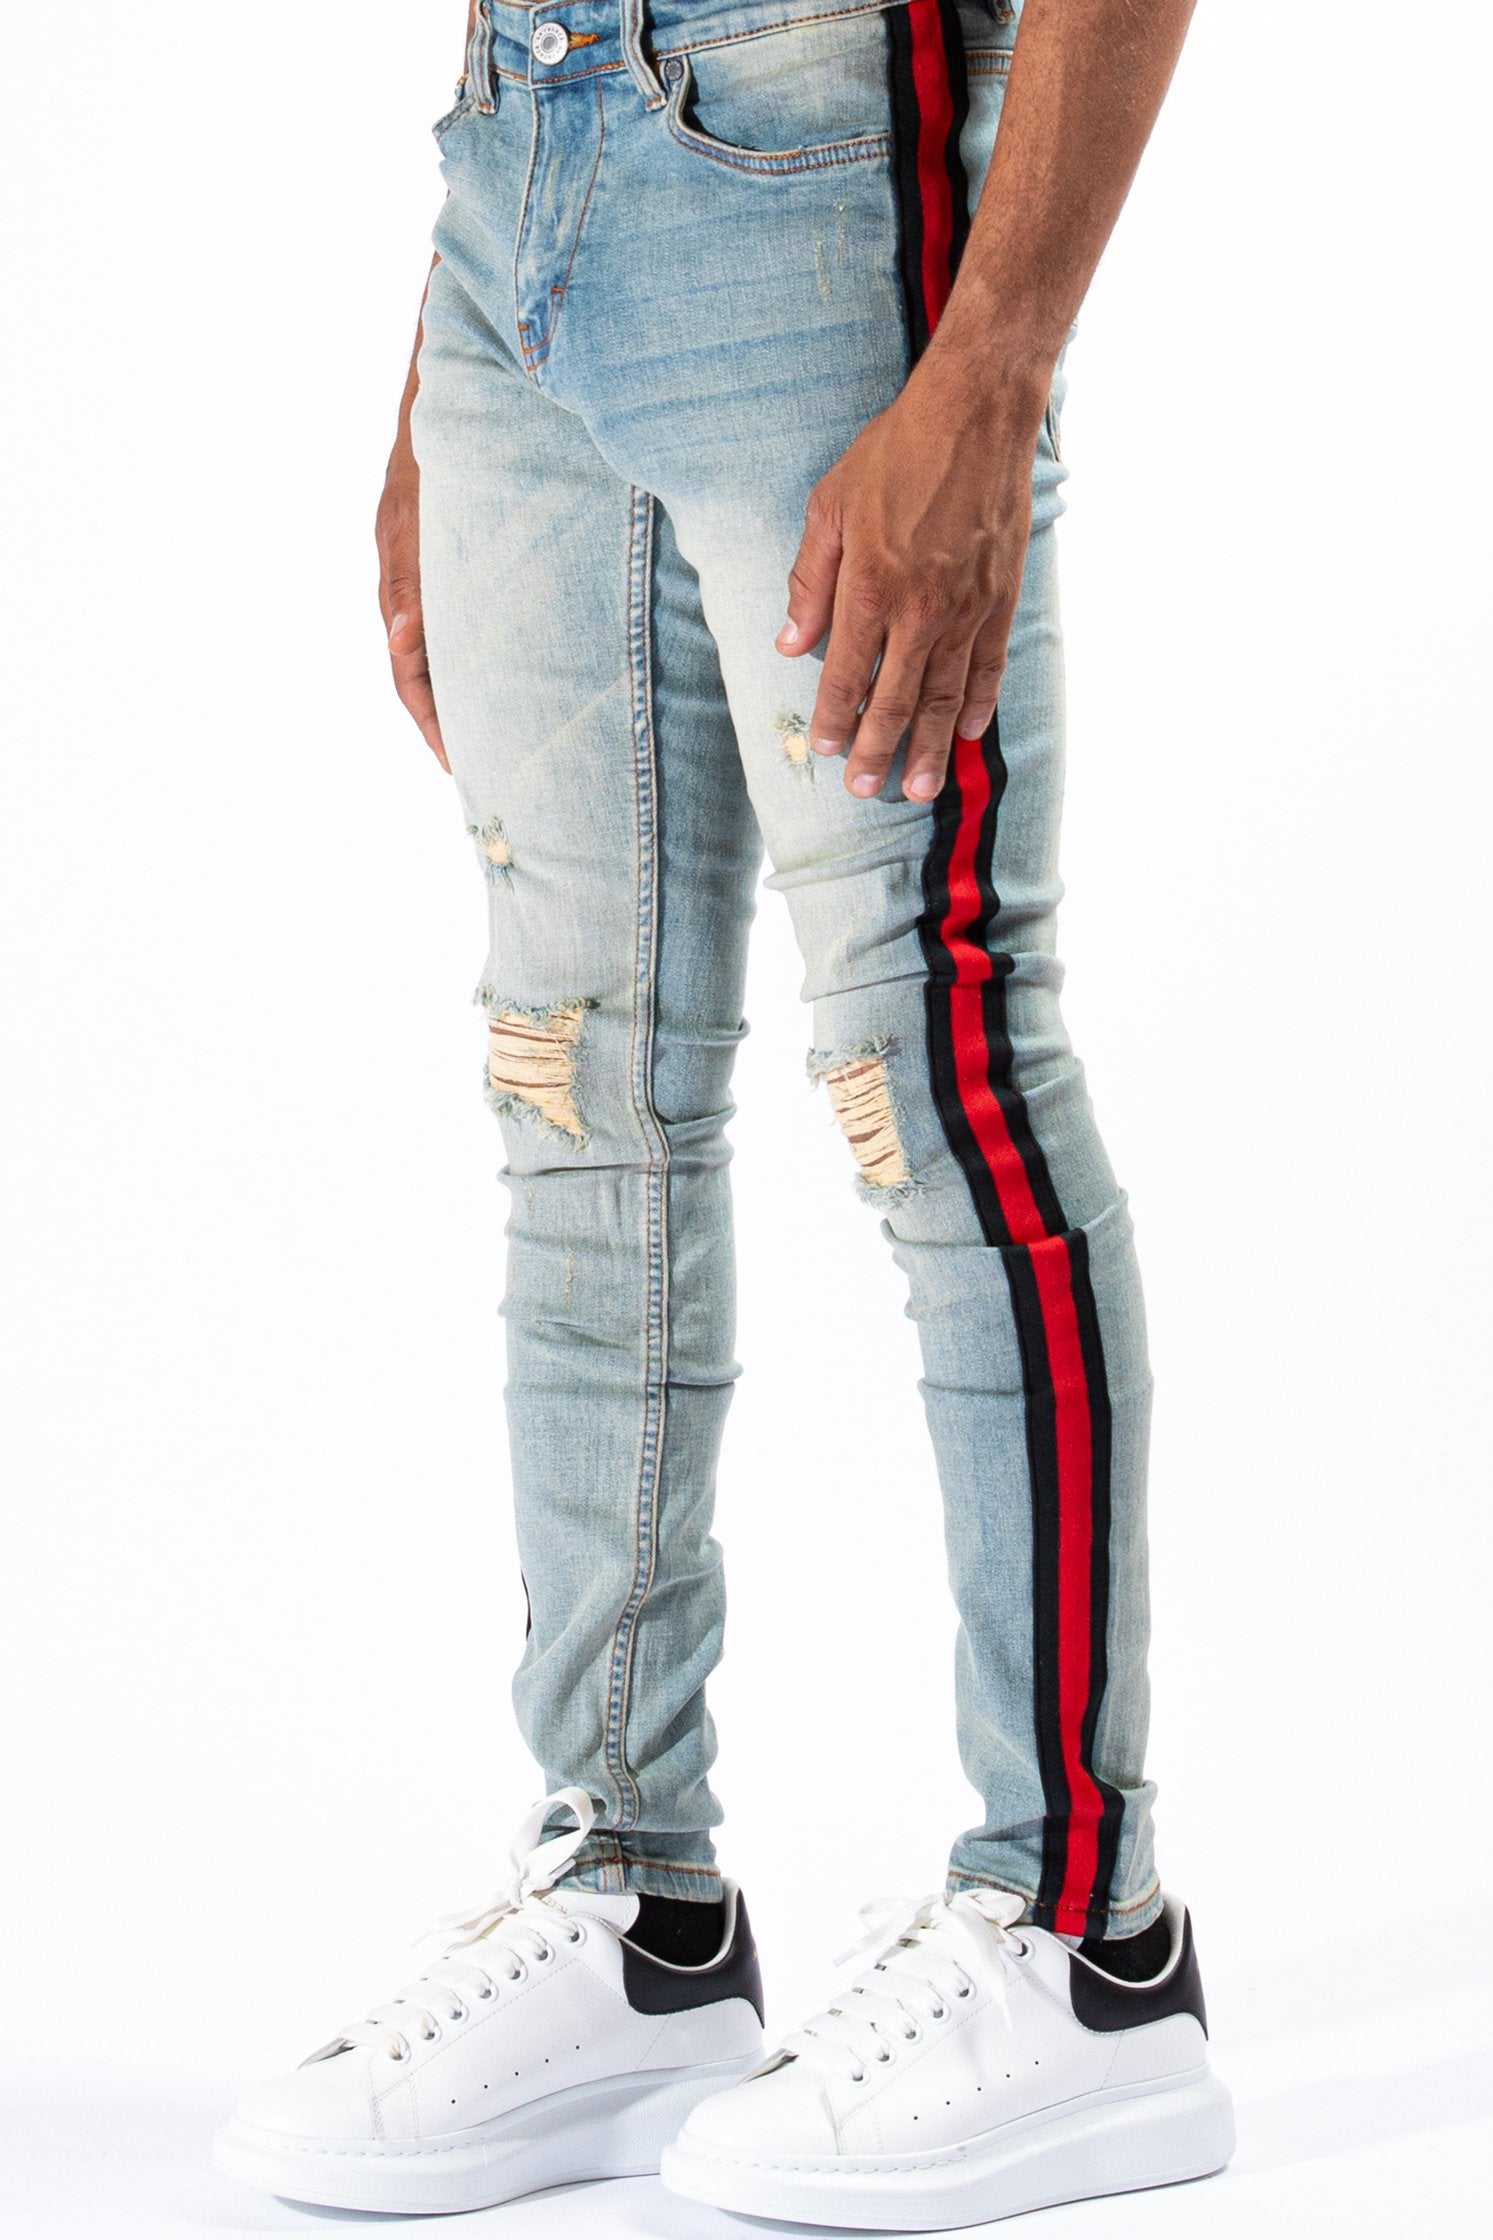 helix jeans discontinued